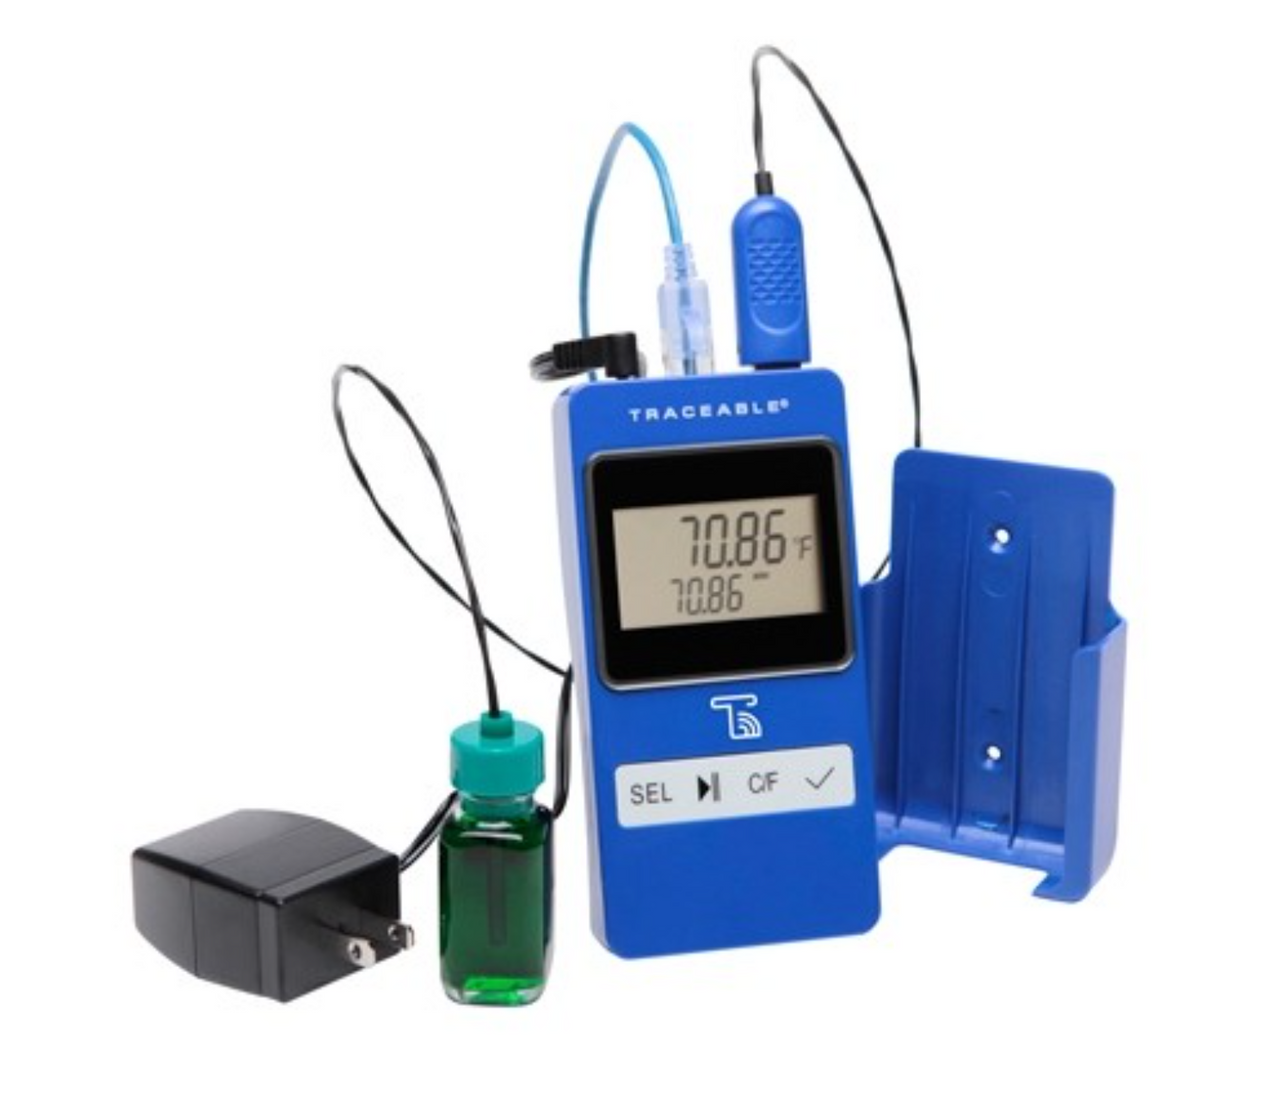 https://cdn11.bigcommerce.com/s-ryt90hjx0j/images/stencil/1280x1280/products/26862/33564/Traceable_Data_Logging_Ethernet_Thermometers_compatible_with_TraceableLIVE_Cloud_Service__48257__55533.1644764359.PNG?c=1?imbypass=on